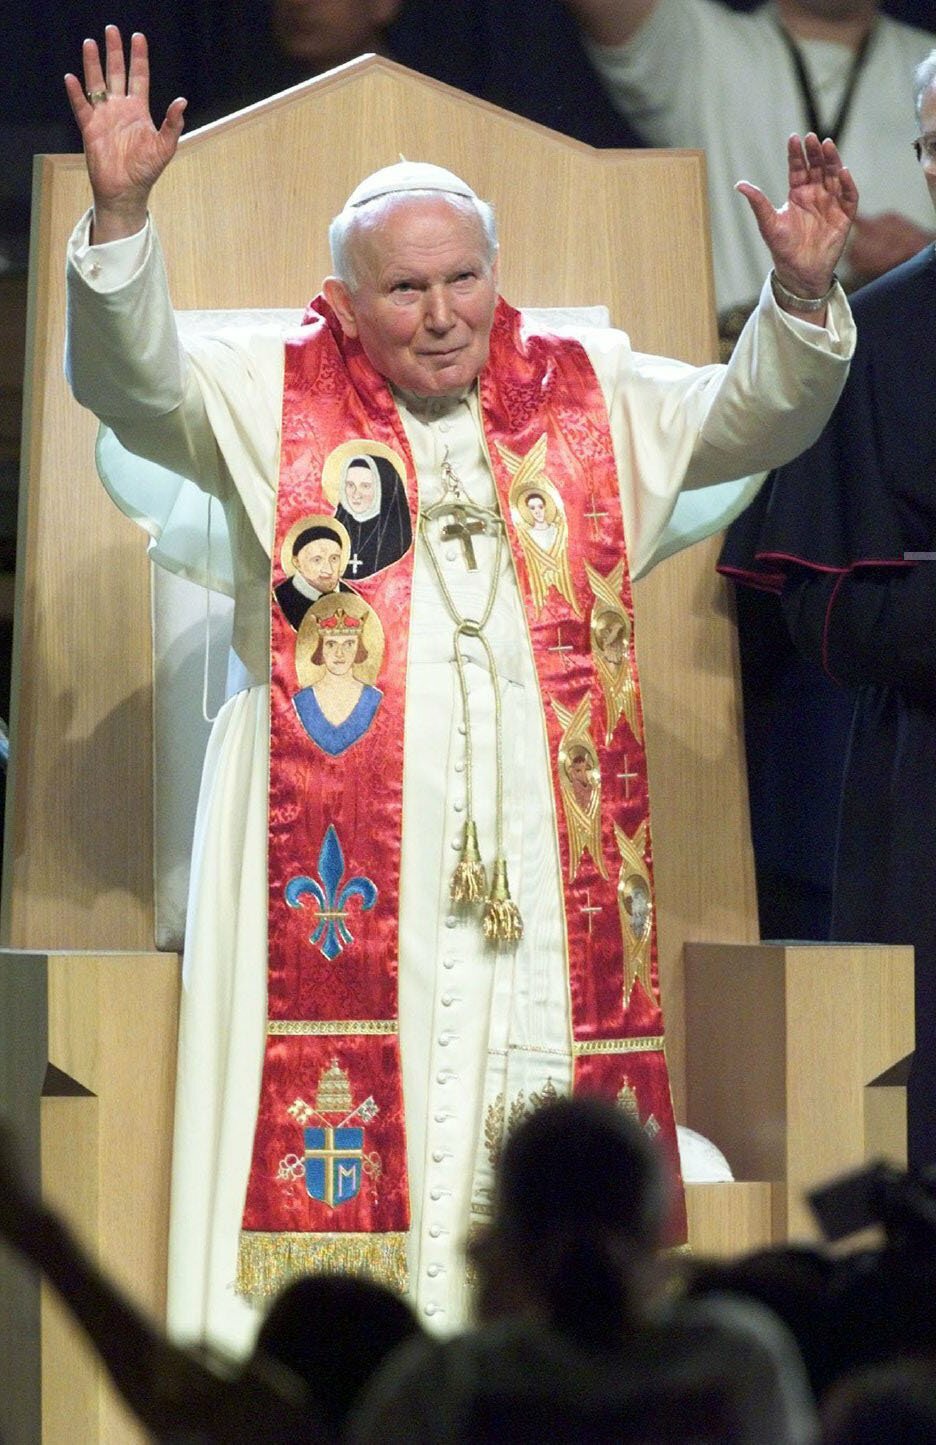 RALLY GREETING -- Pope John Paul II raises his arms in greeting on arrival at the Light of the World youth rally Jan. 26, 1999 at the Kiel Center in St. Louis. (CNS photo from Reuters) (Jan. 27, 1999) See STLOUIS-KIEL Jan. 27, 1999.